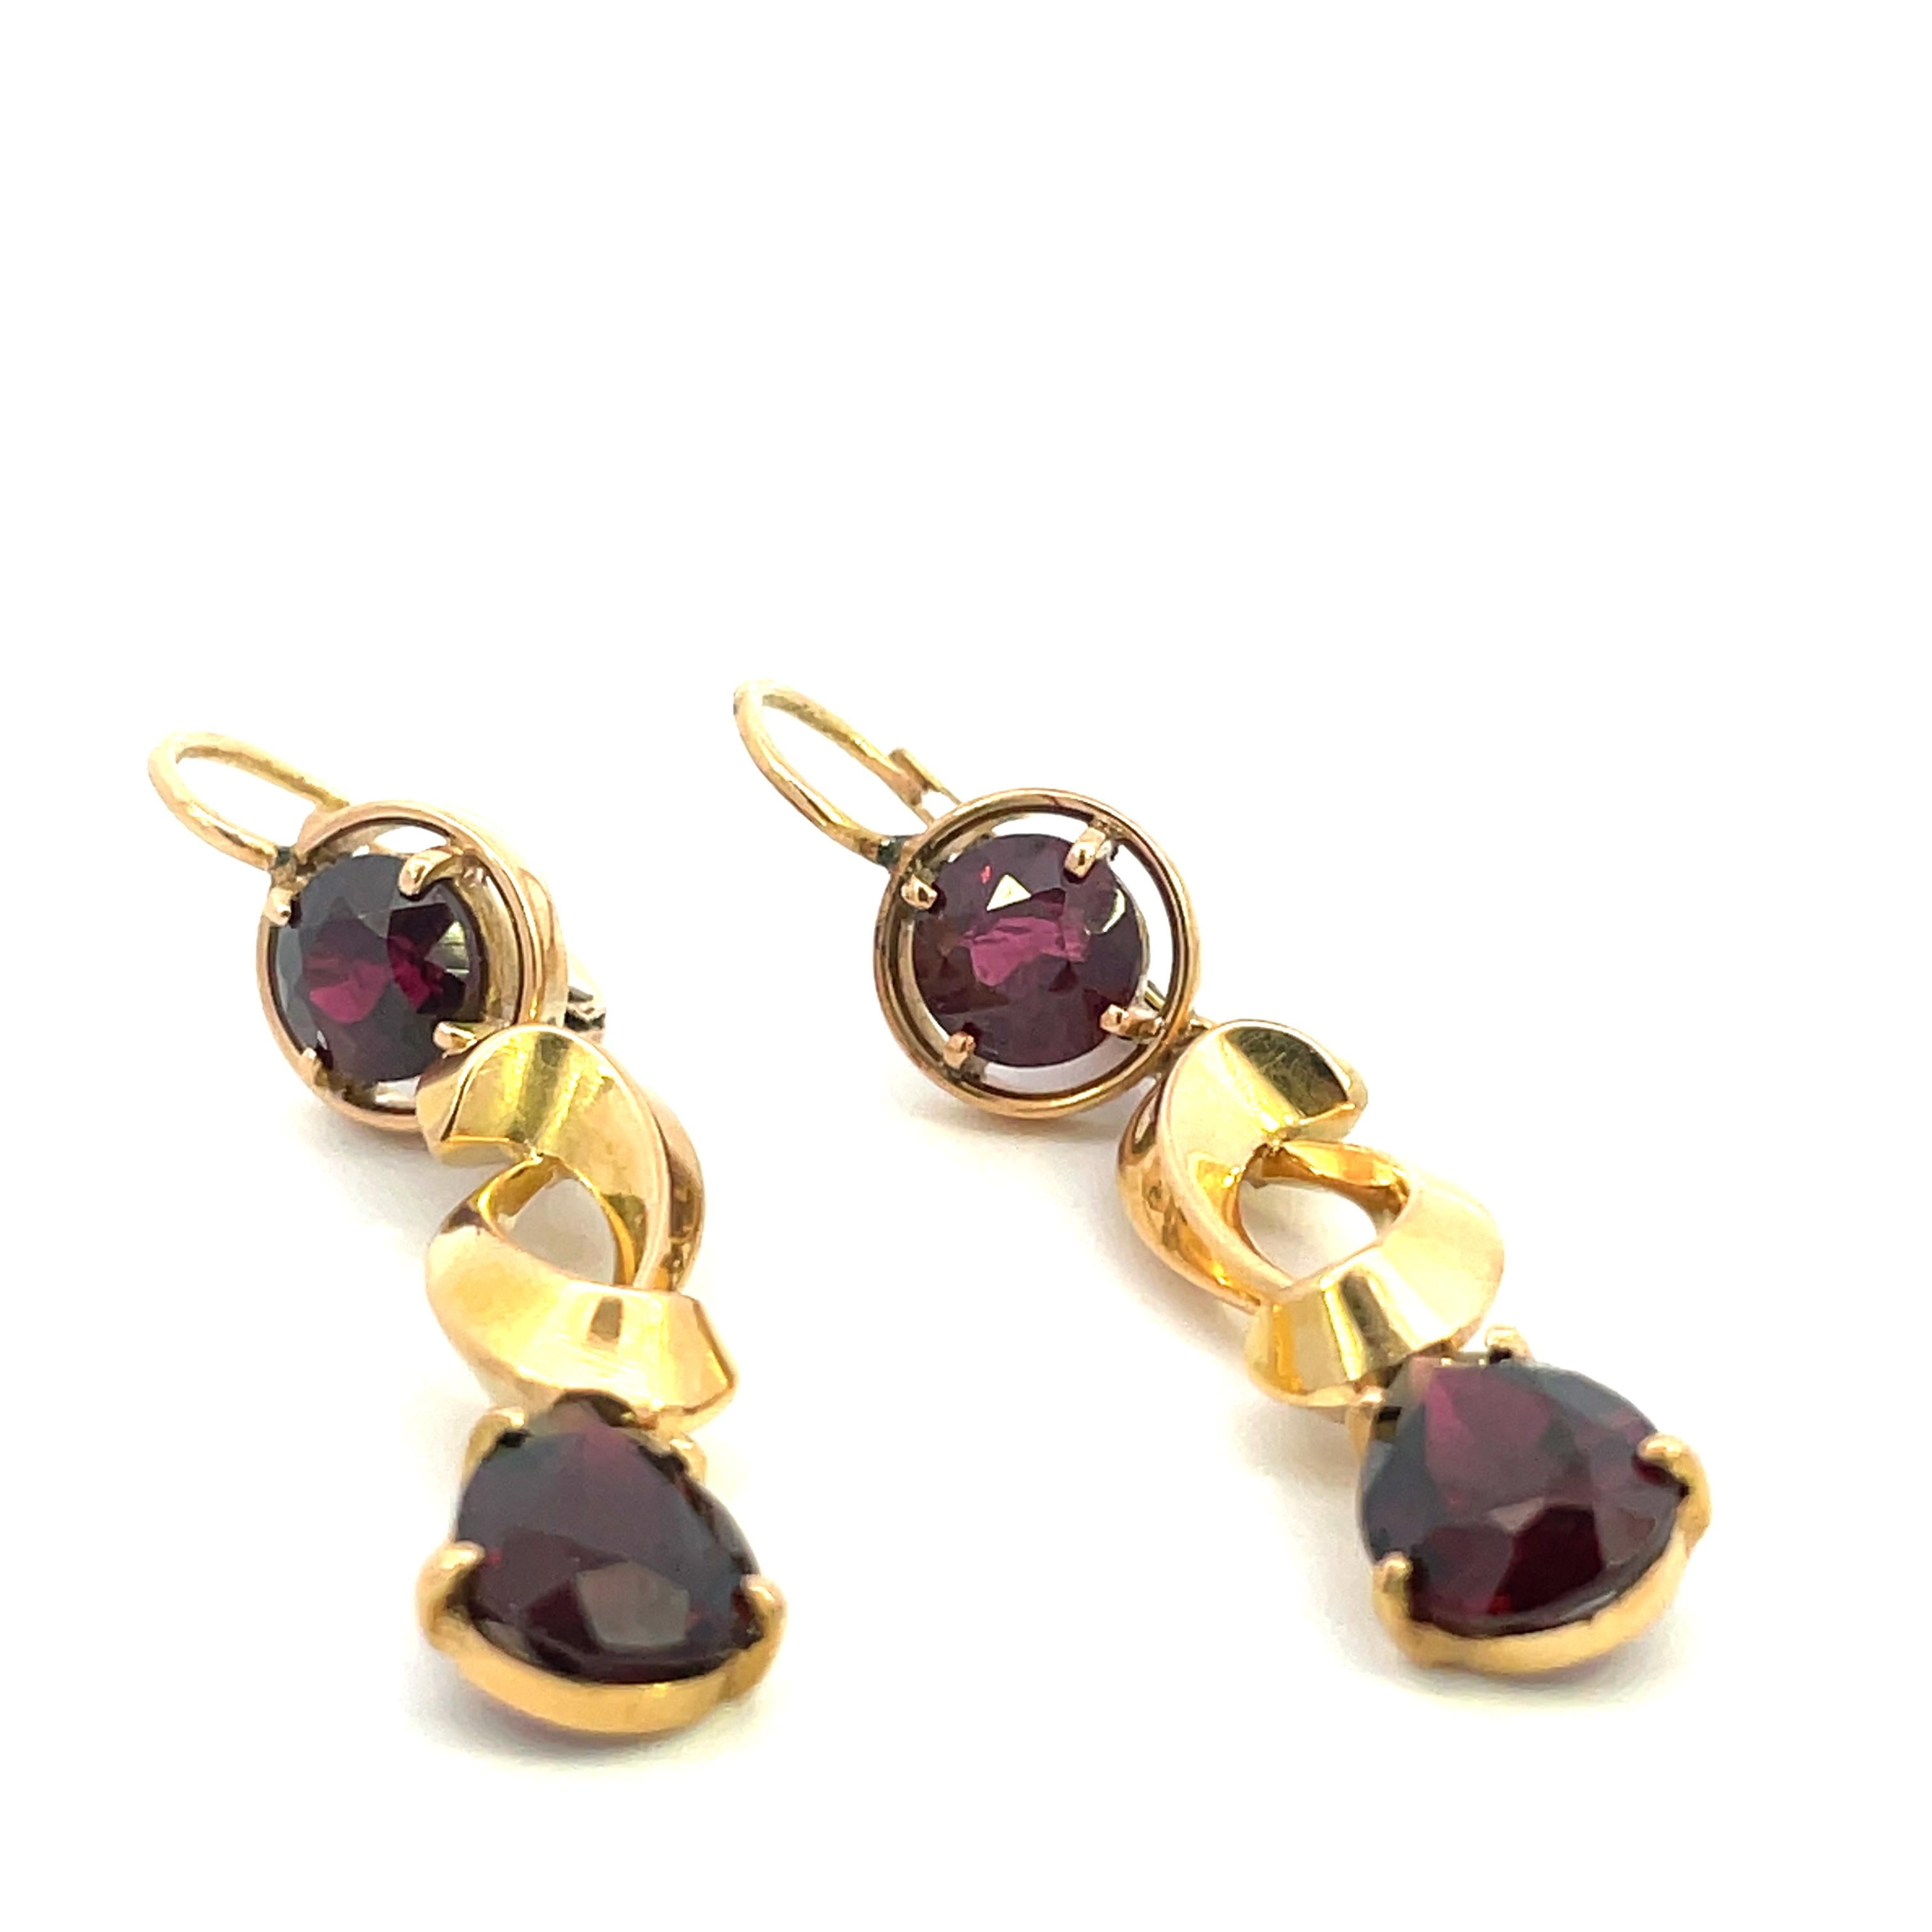 - 18K Yellow Gold 
- 2 = 1.10 TW Round Cut Garnet 
- 2 = 2.24 Tw Pear Cut Garnet 
- 7 CTTW 
- 7.10 Grams 

This is a stunning pair of retro drop earrings made in 18k yellow gold with garnet. Each earring contains a 1.10 twt round cut garnet stud at